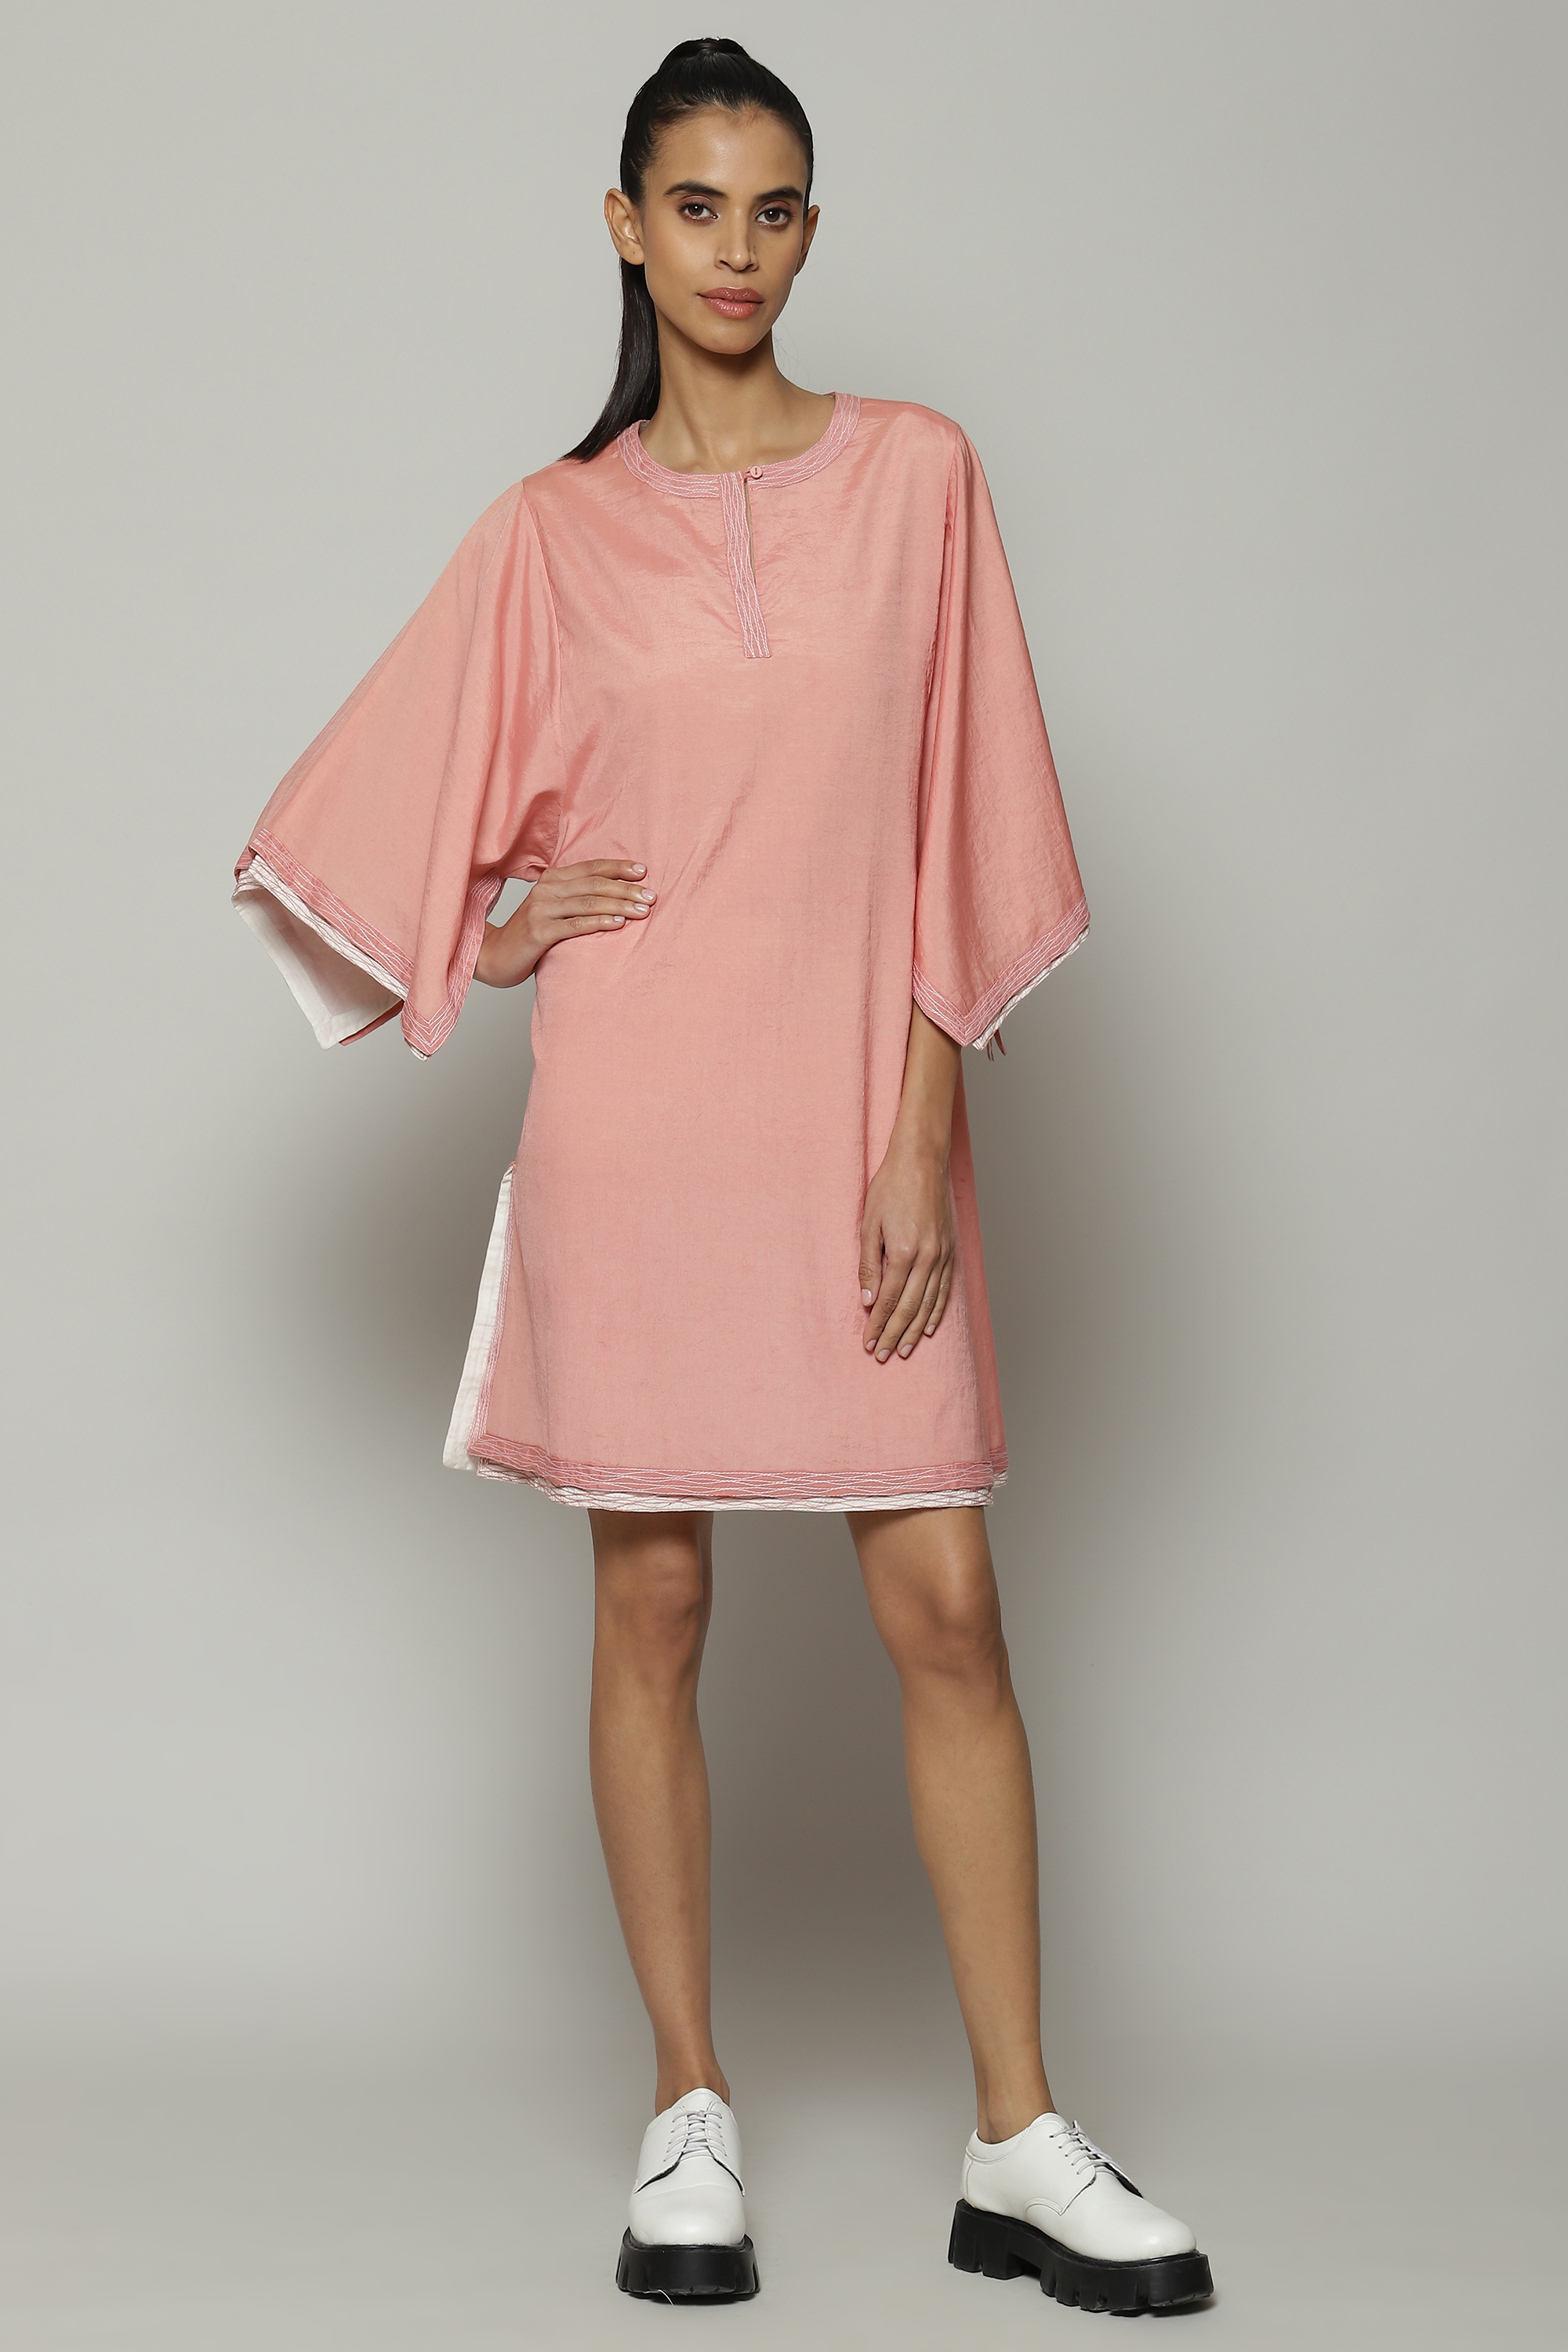 ABRAHAM AND THAKORE | Double Sheer Luxe Voile Kurta Pink